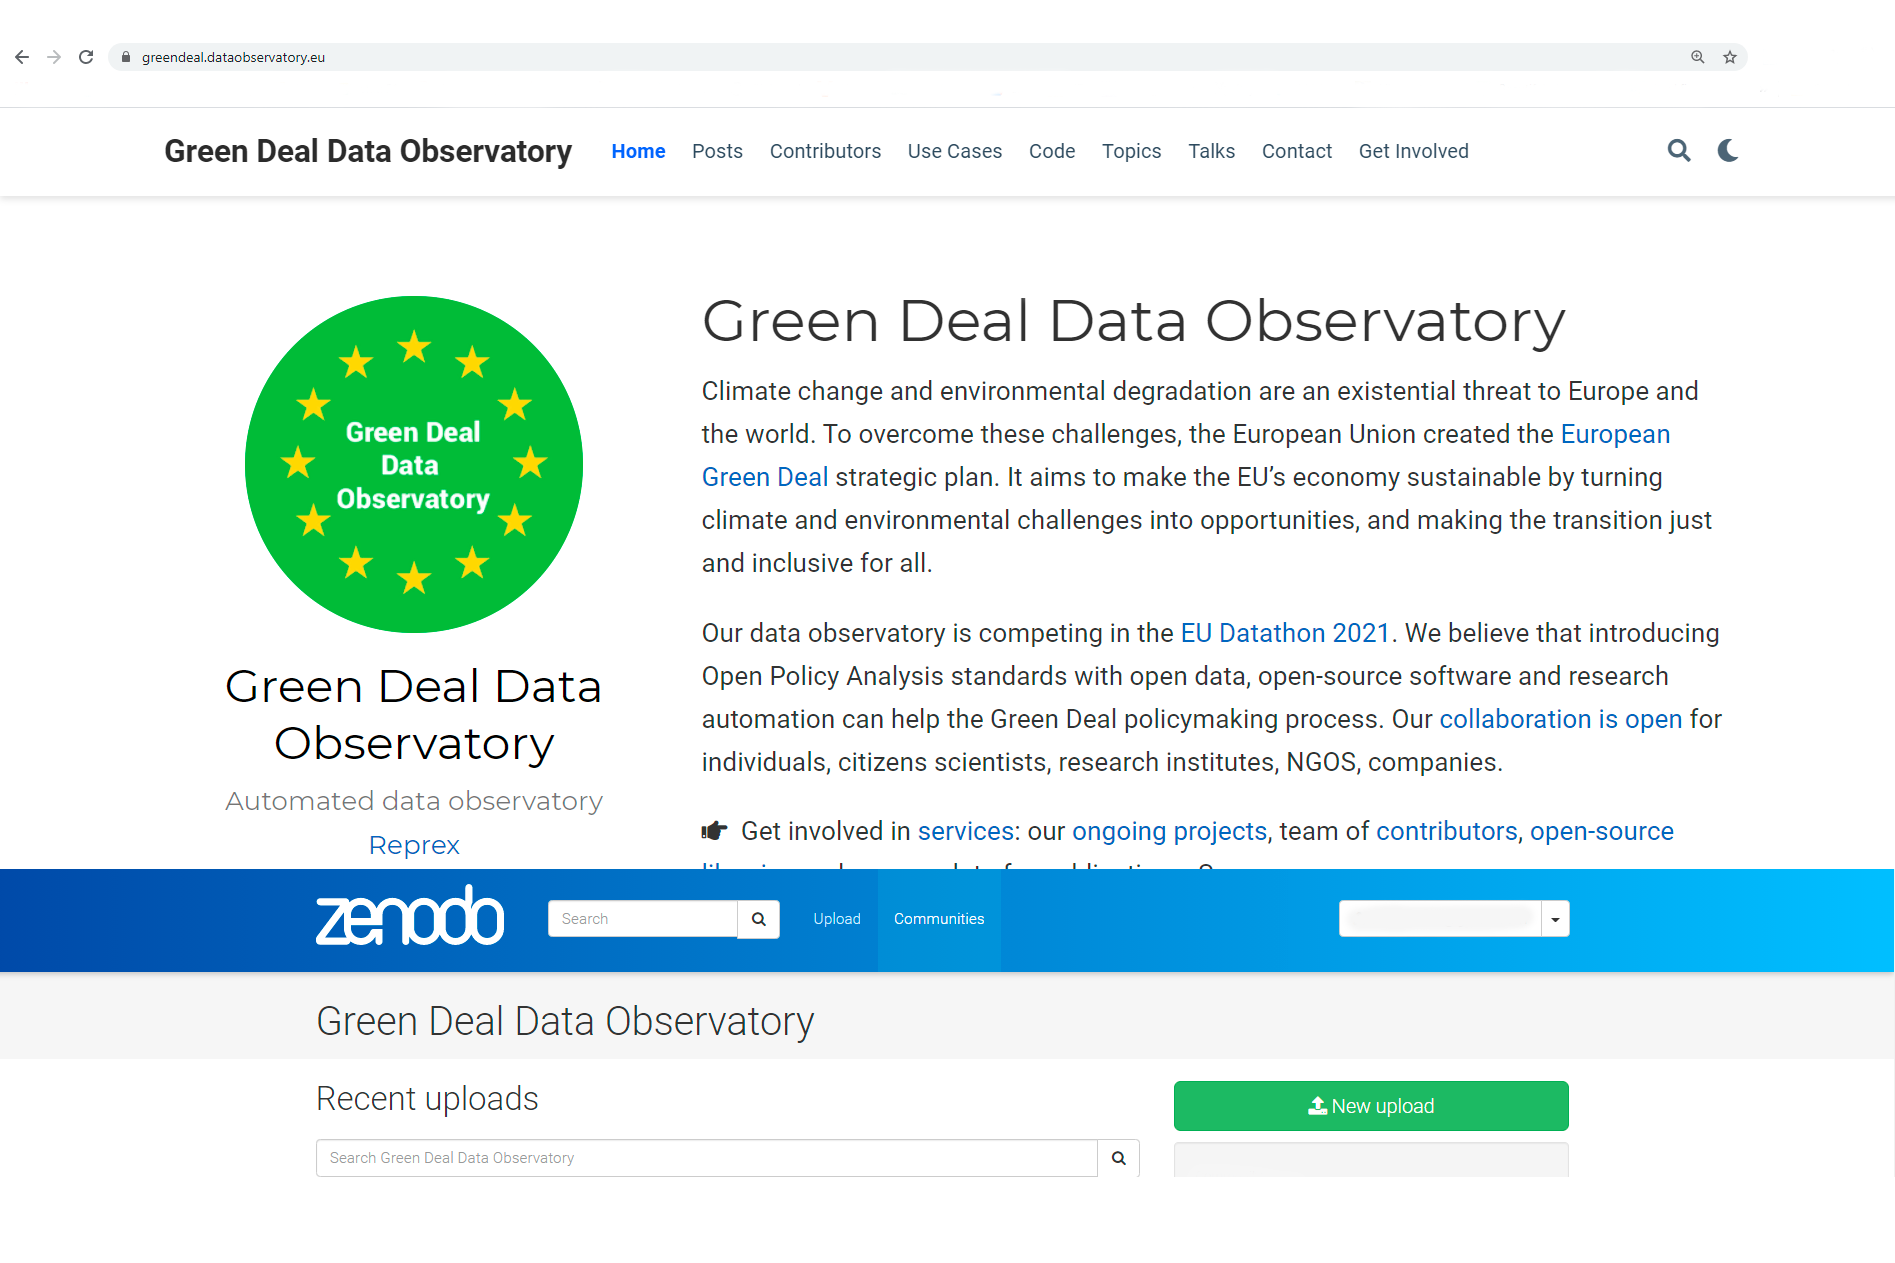 Join our open collaboration Green Deal Data Observatory team as a [data curator](/authors/curator), [developer](/authors/developer) or [business developer](/authors/team), or share your data in our public repository[Green Deal Data Observatory on Zenodo](https://zenodo.org/communities/greendeal_observatory/)